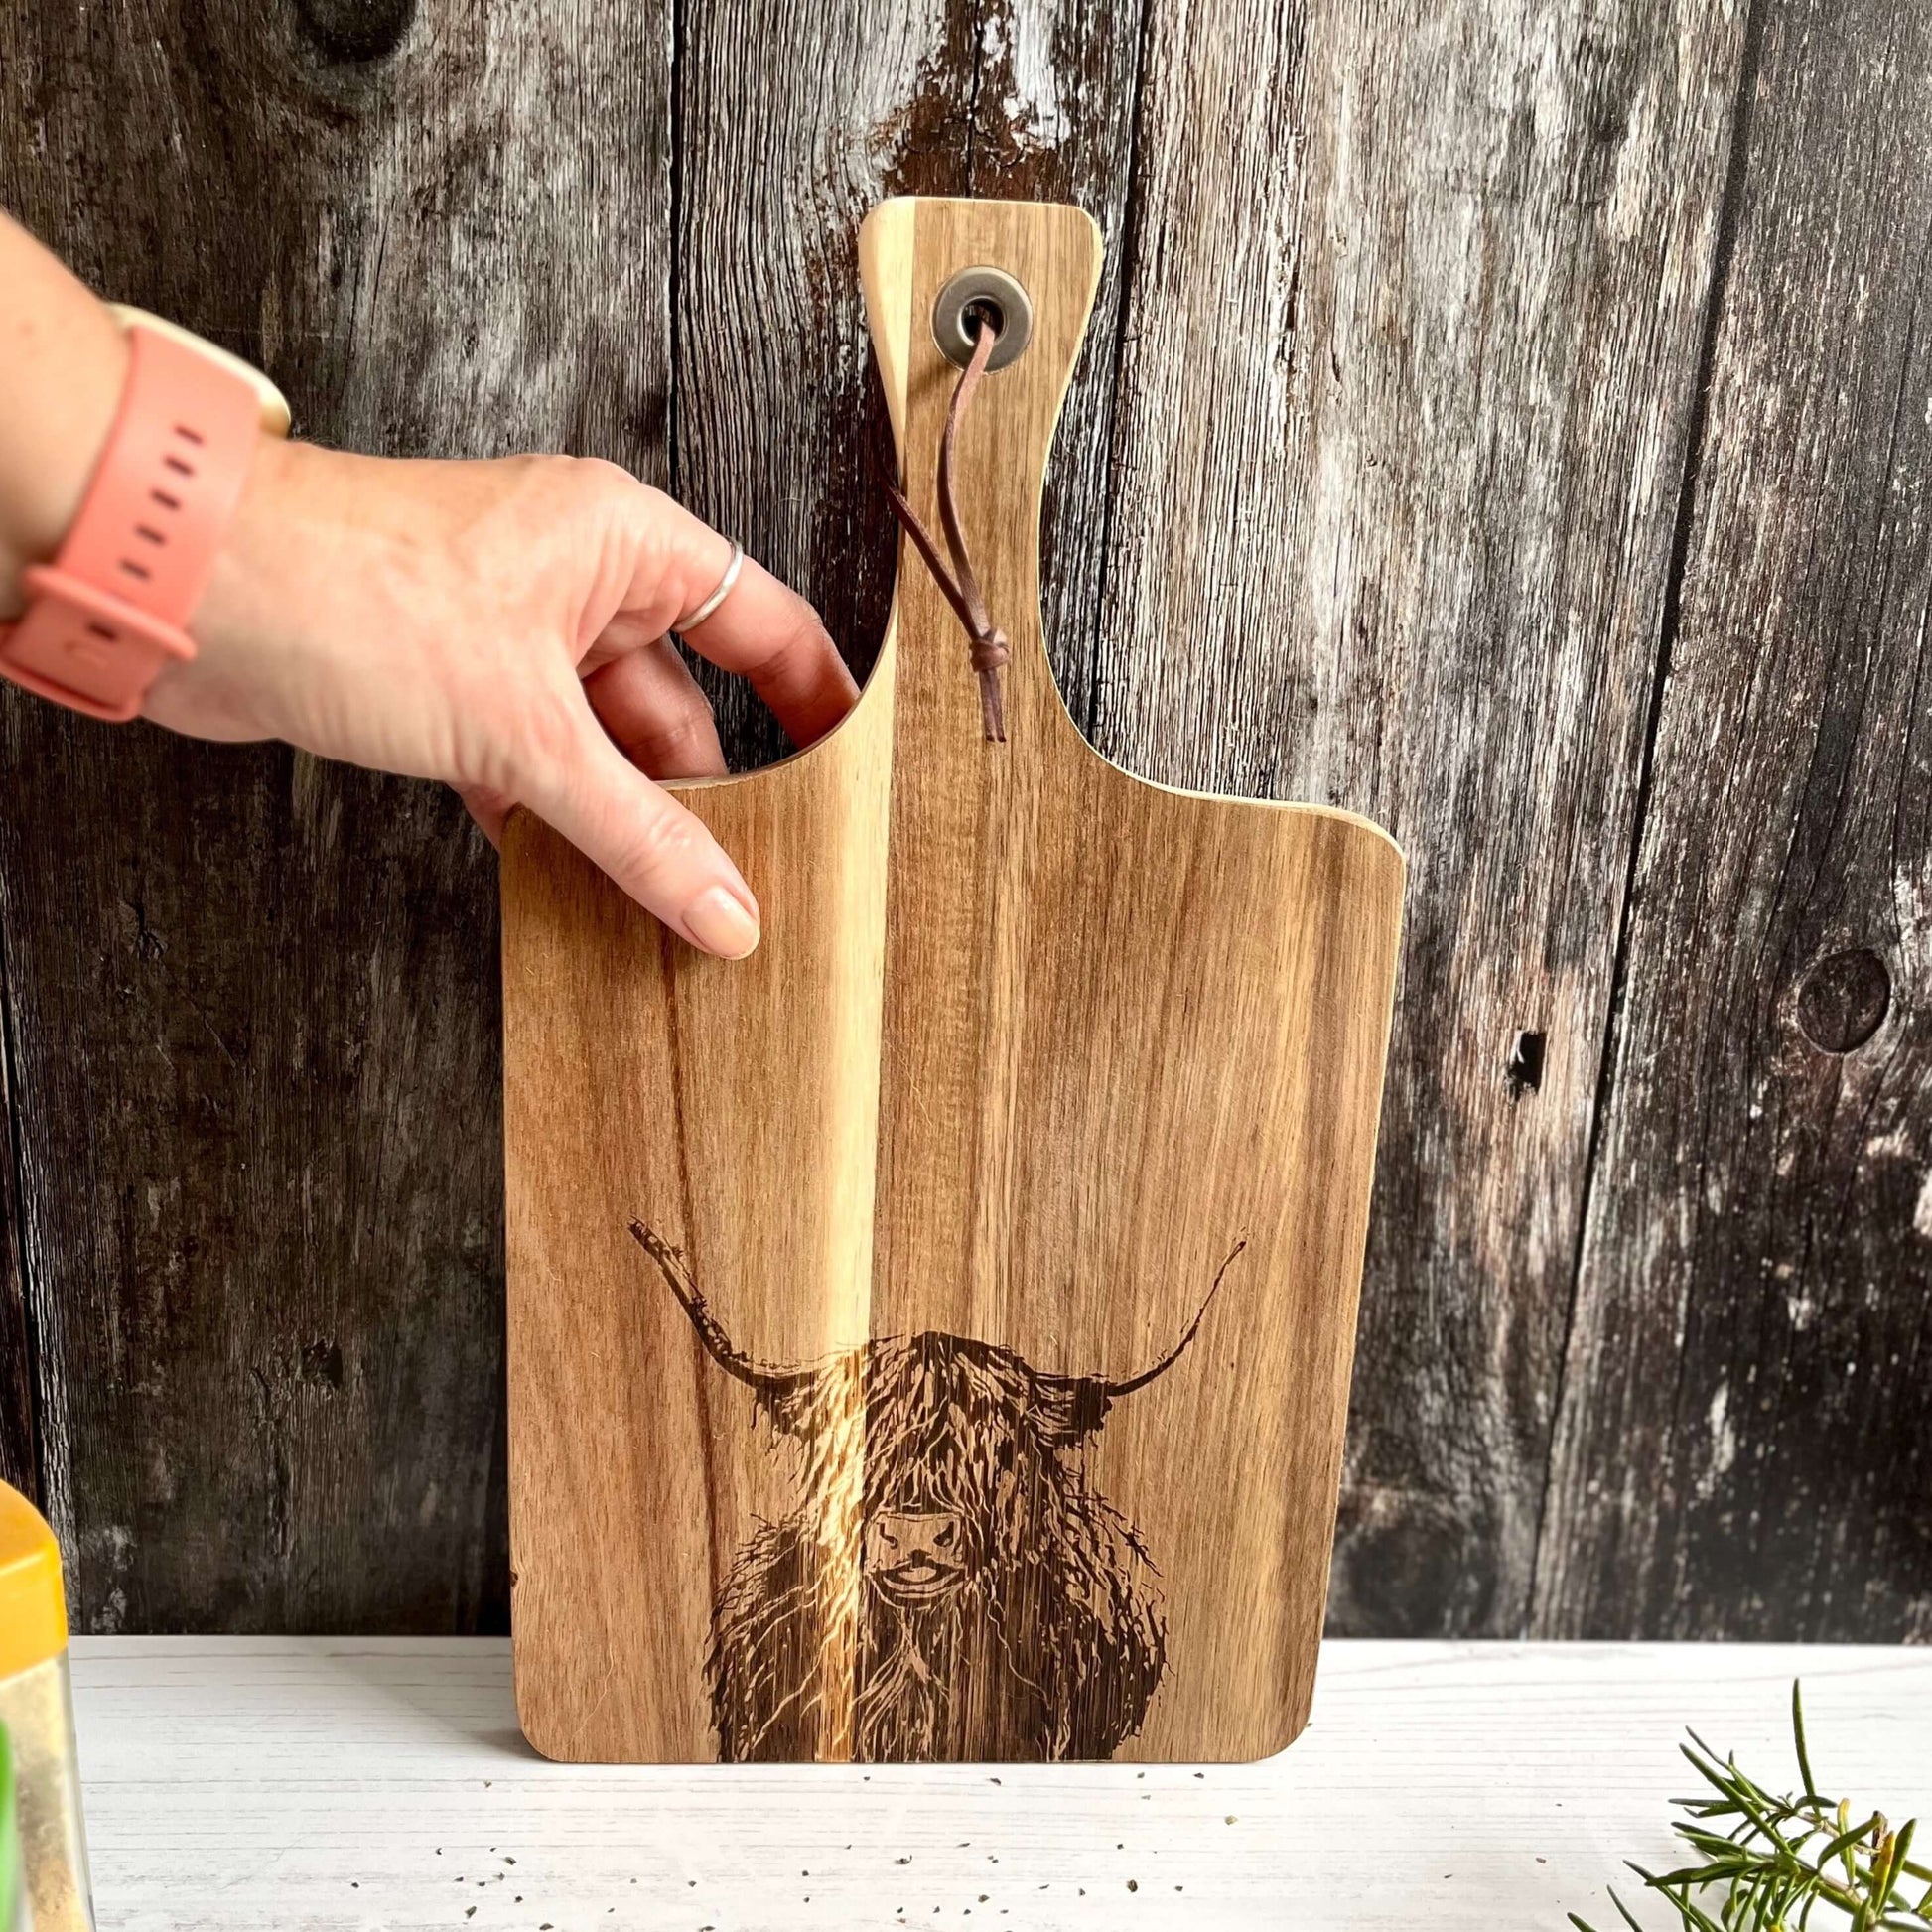 Highland Cow Cutting Board With Hand Picking it Up